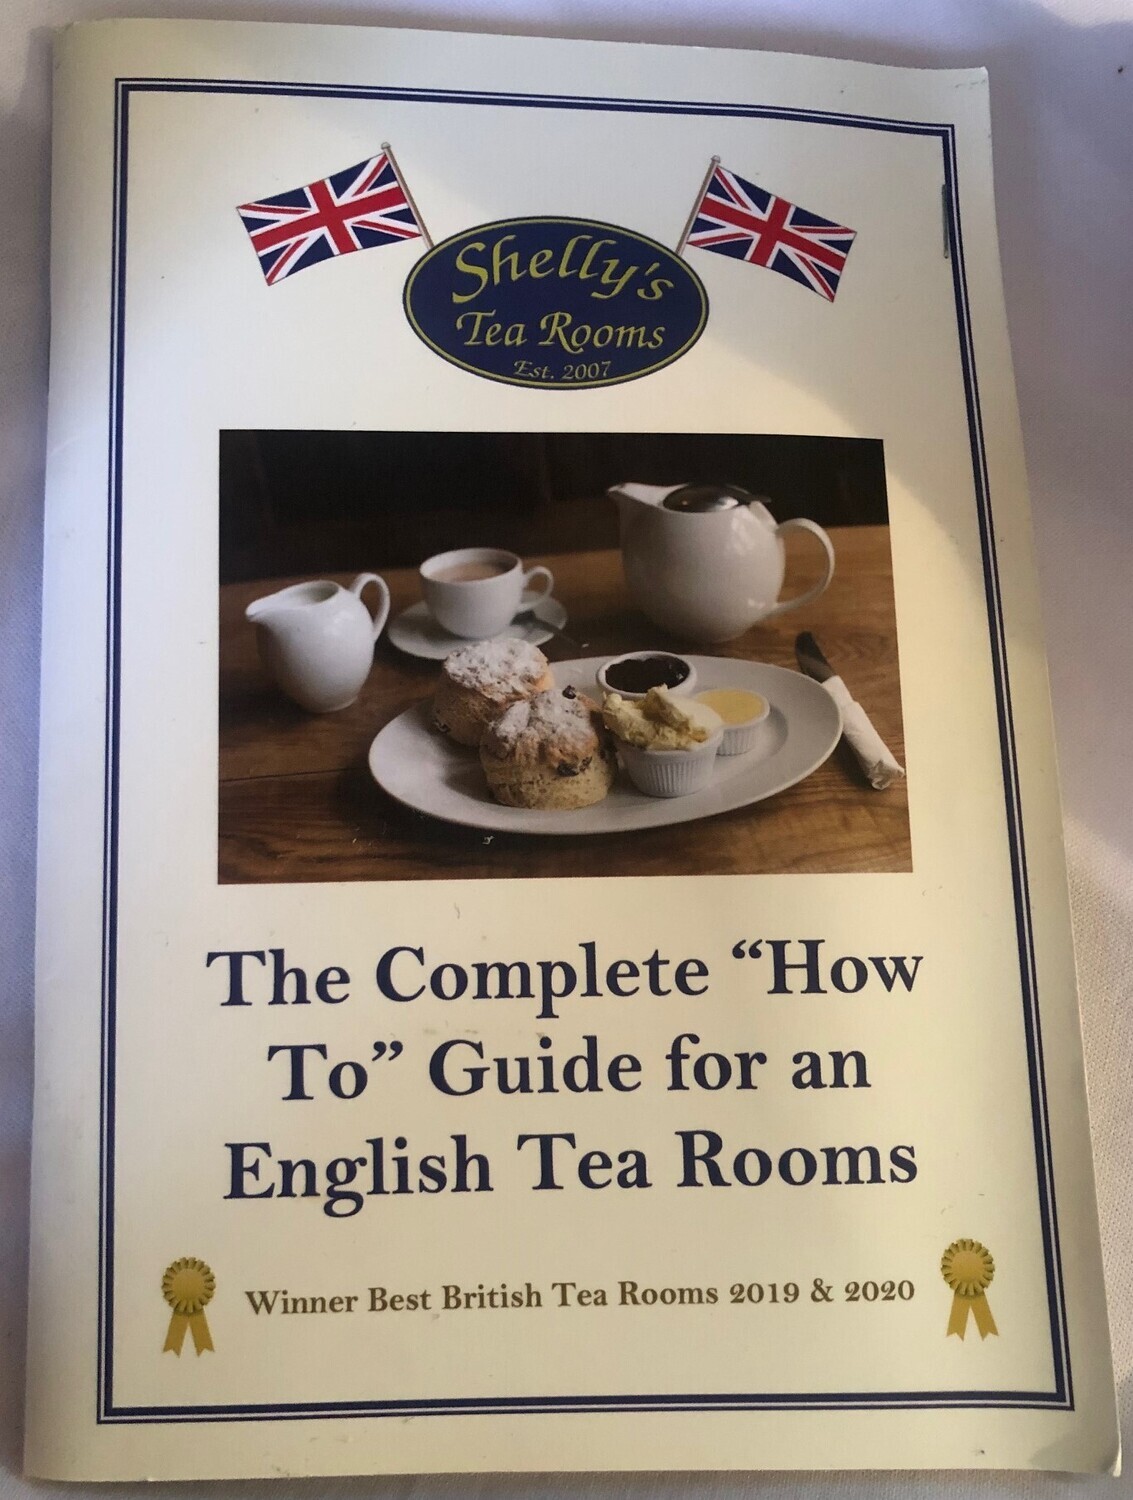 The How to guide for an English Tea Rooms